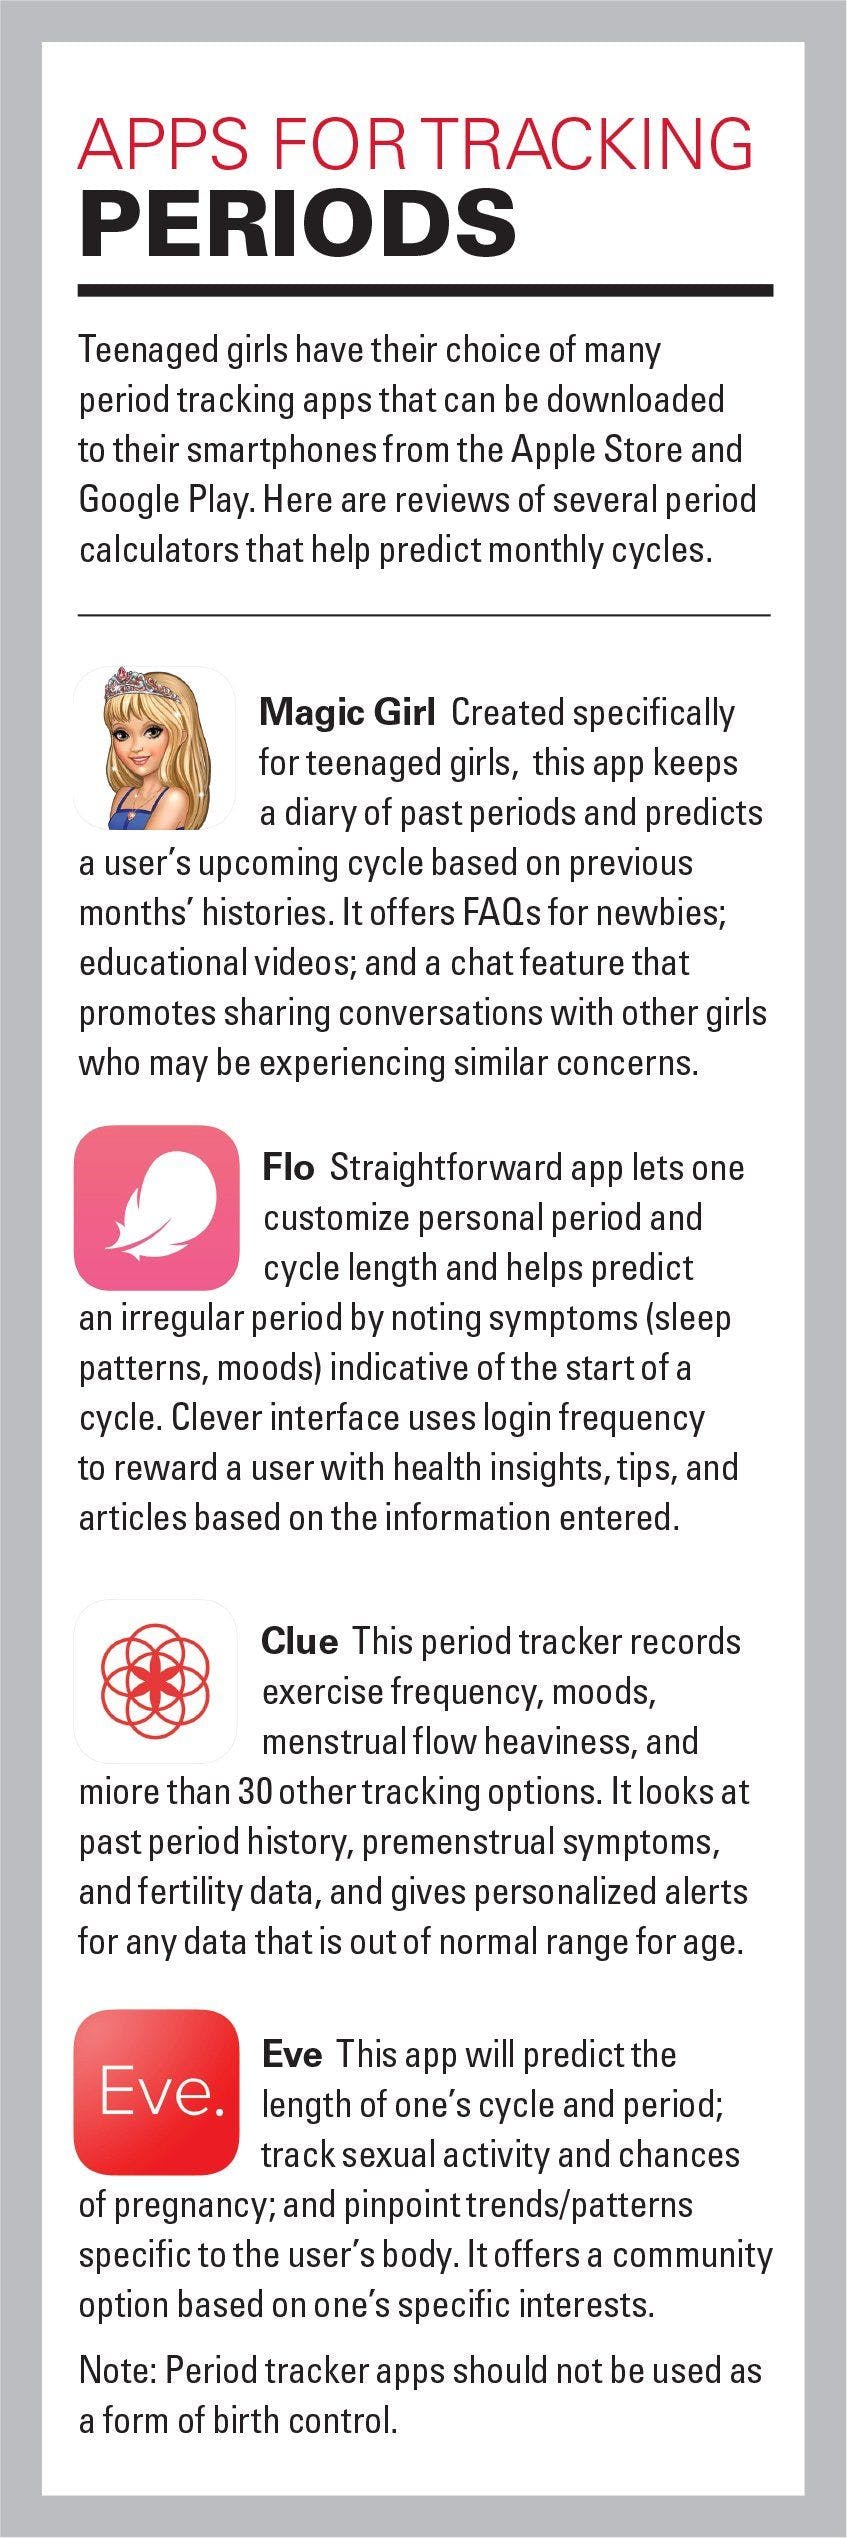 Apps for tracking periods